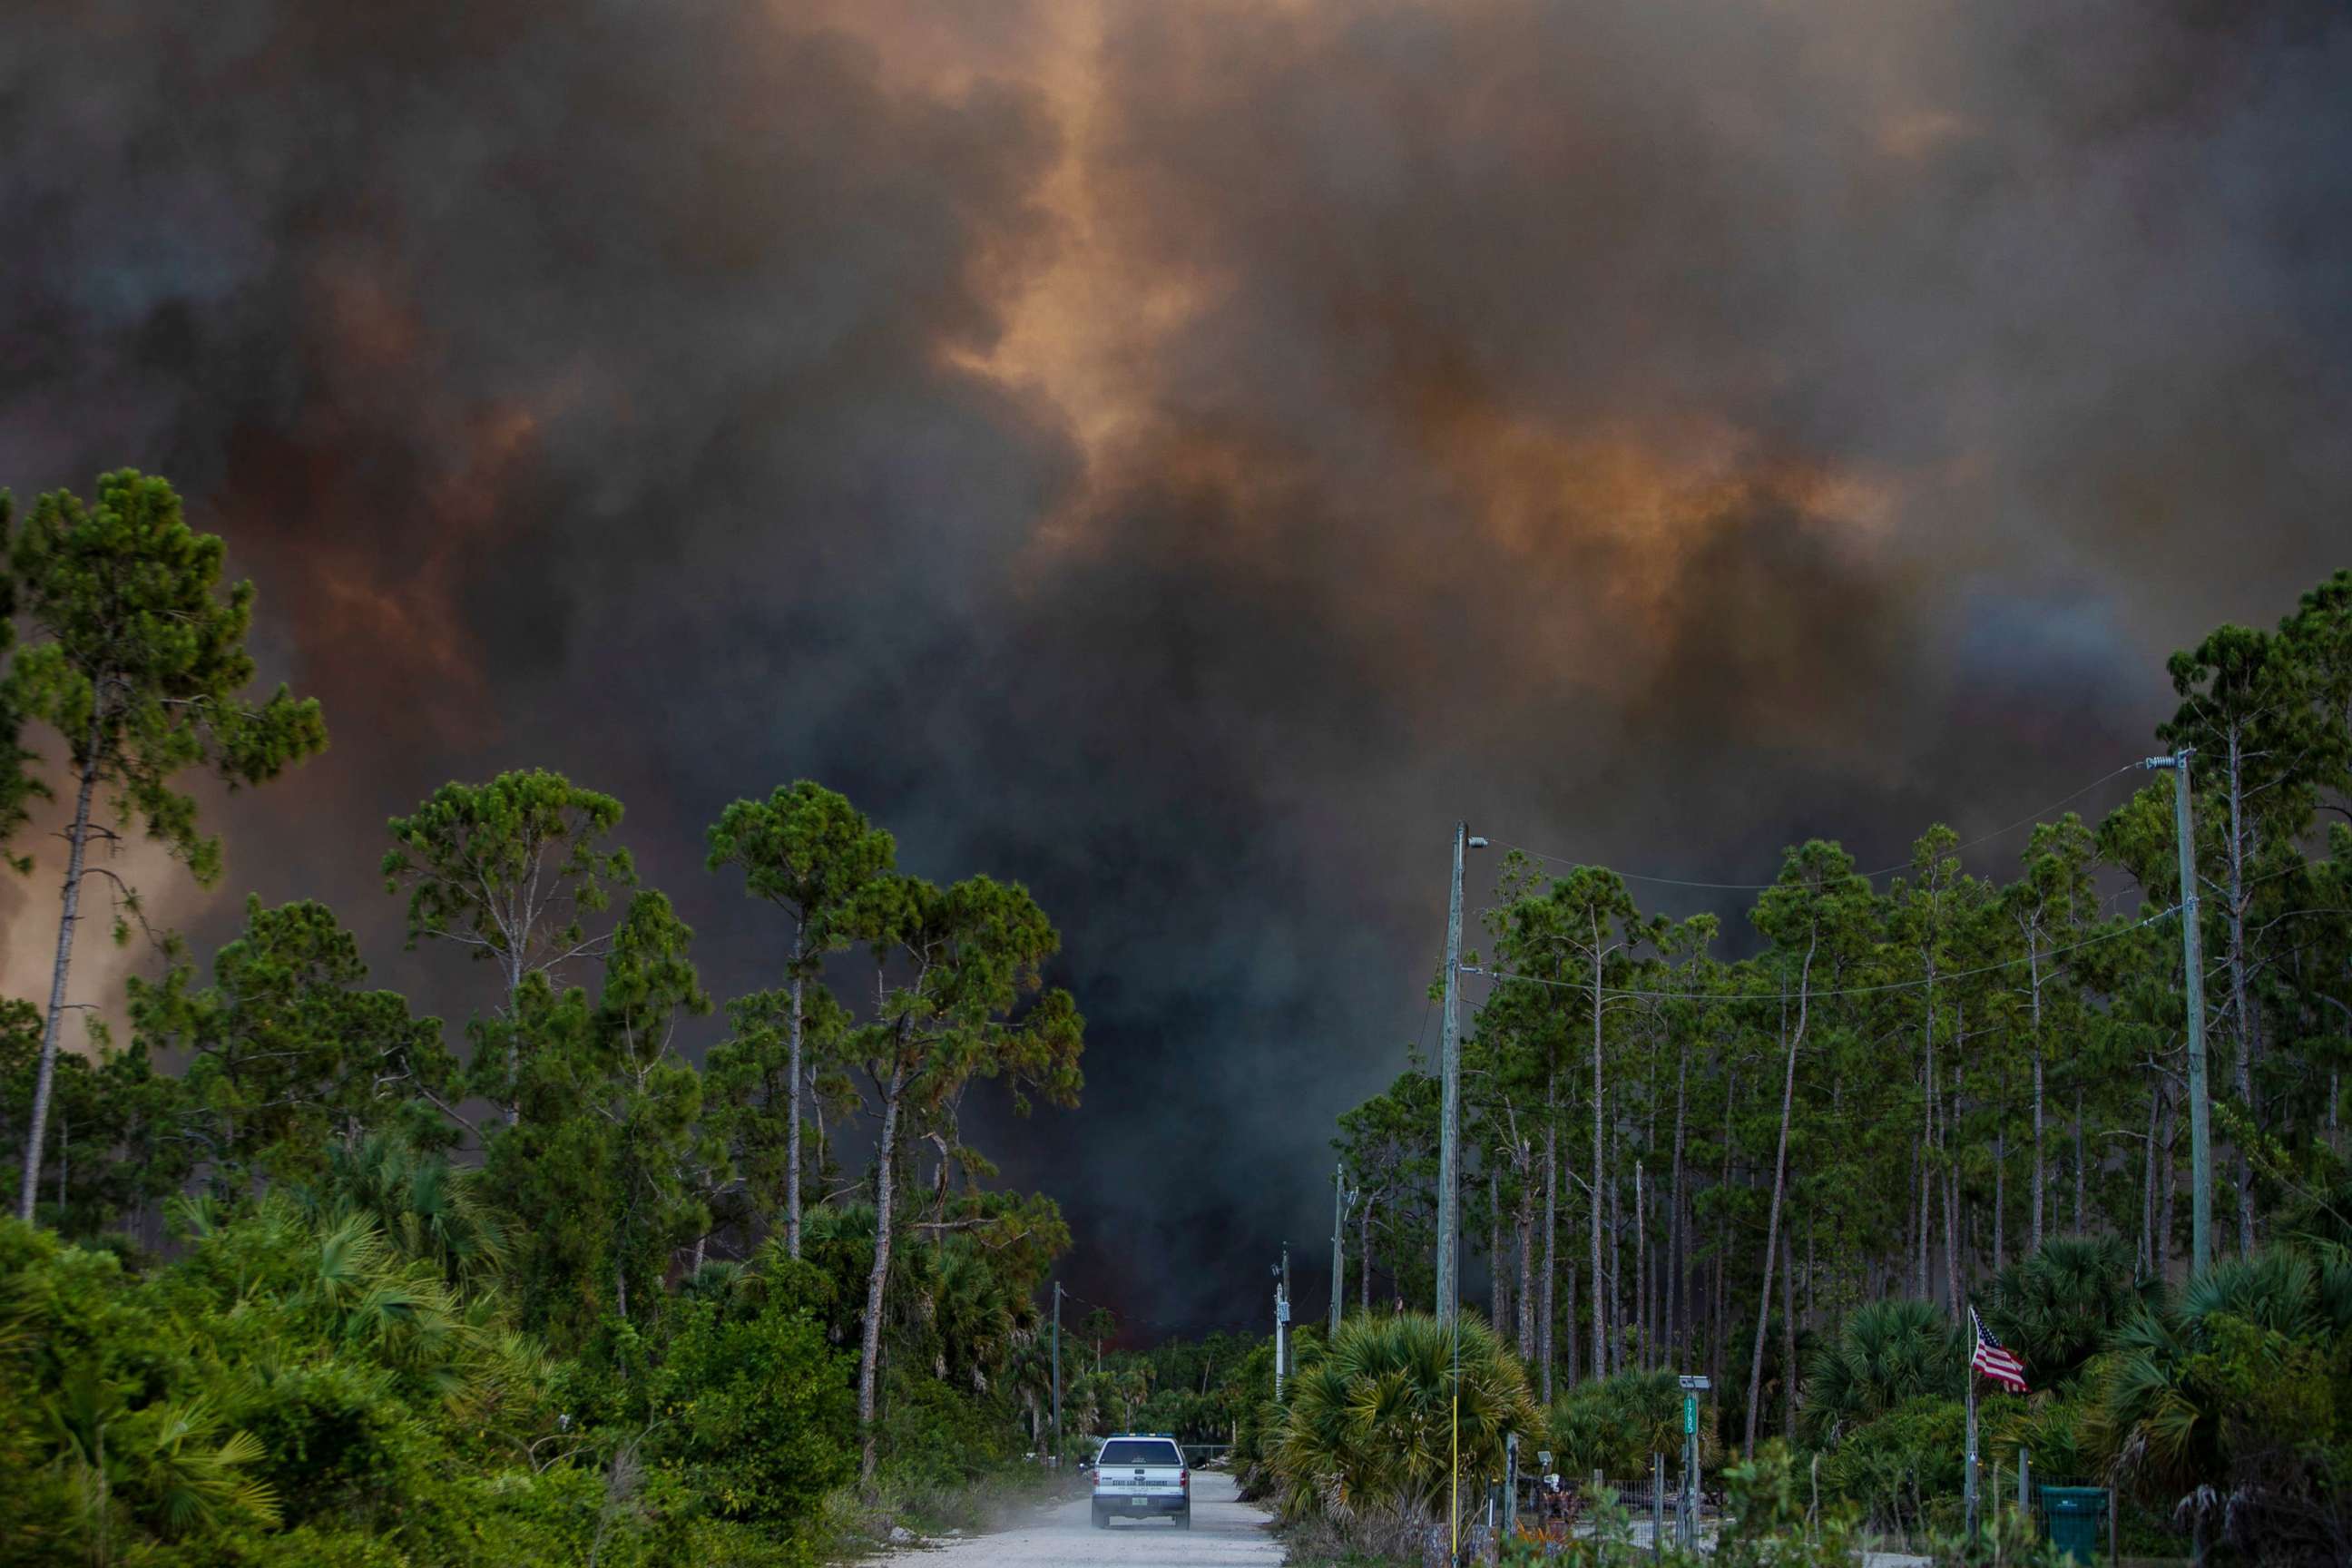 PHOTO: Smoke from a brush fire in Golden Gate Estates is seen from Dove Tree Lane on May 13, 2020 in Florida.